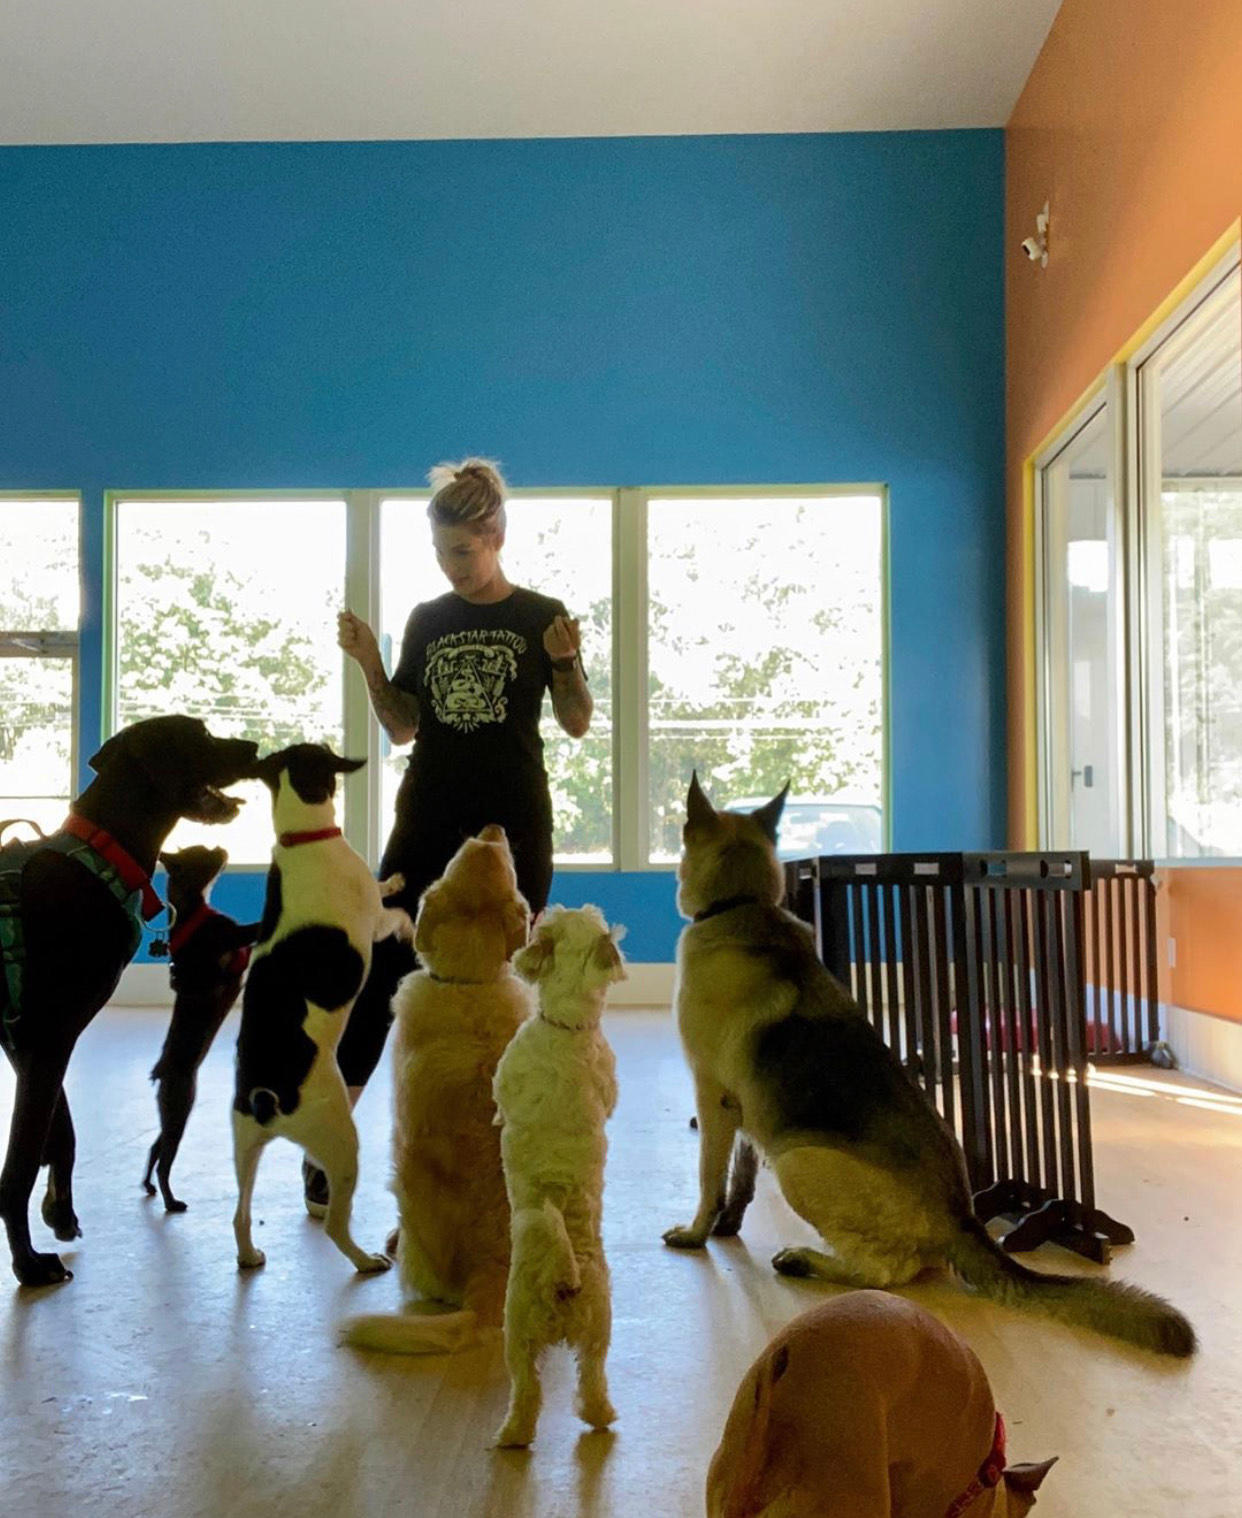 Give your dog the opportunity to socialize and exercise at Pups Playhouse in Wexford, PA, with our Dog Daycare services. Our supervised playgroups and spacious facilities provide a safe and fun environment for your canine companion to make new friends and burn off energy.